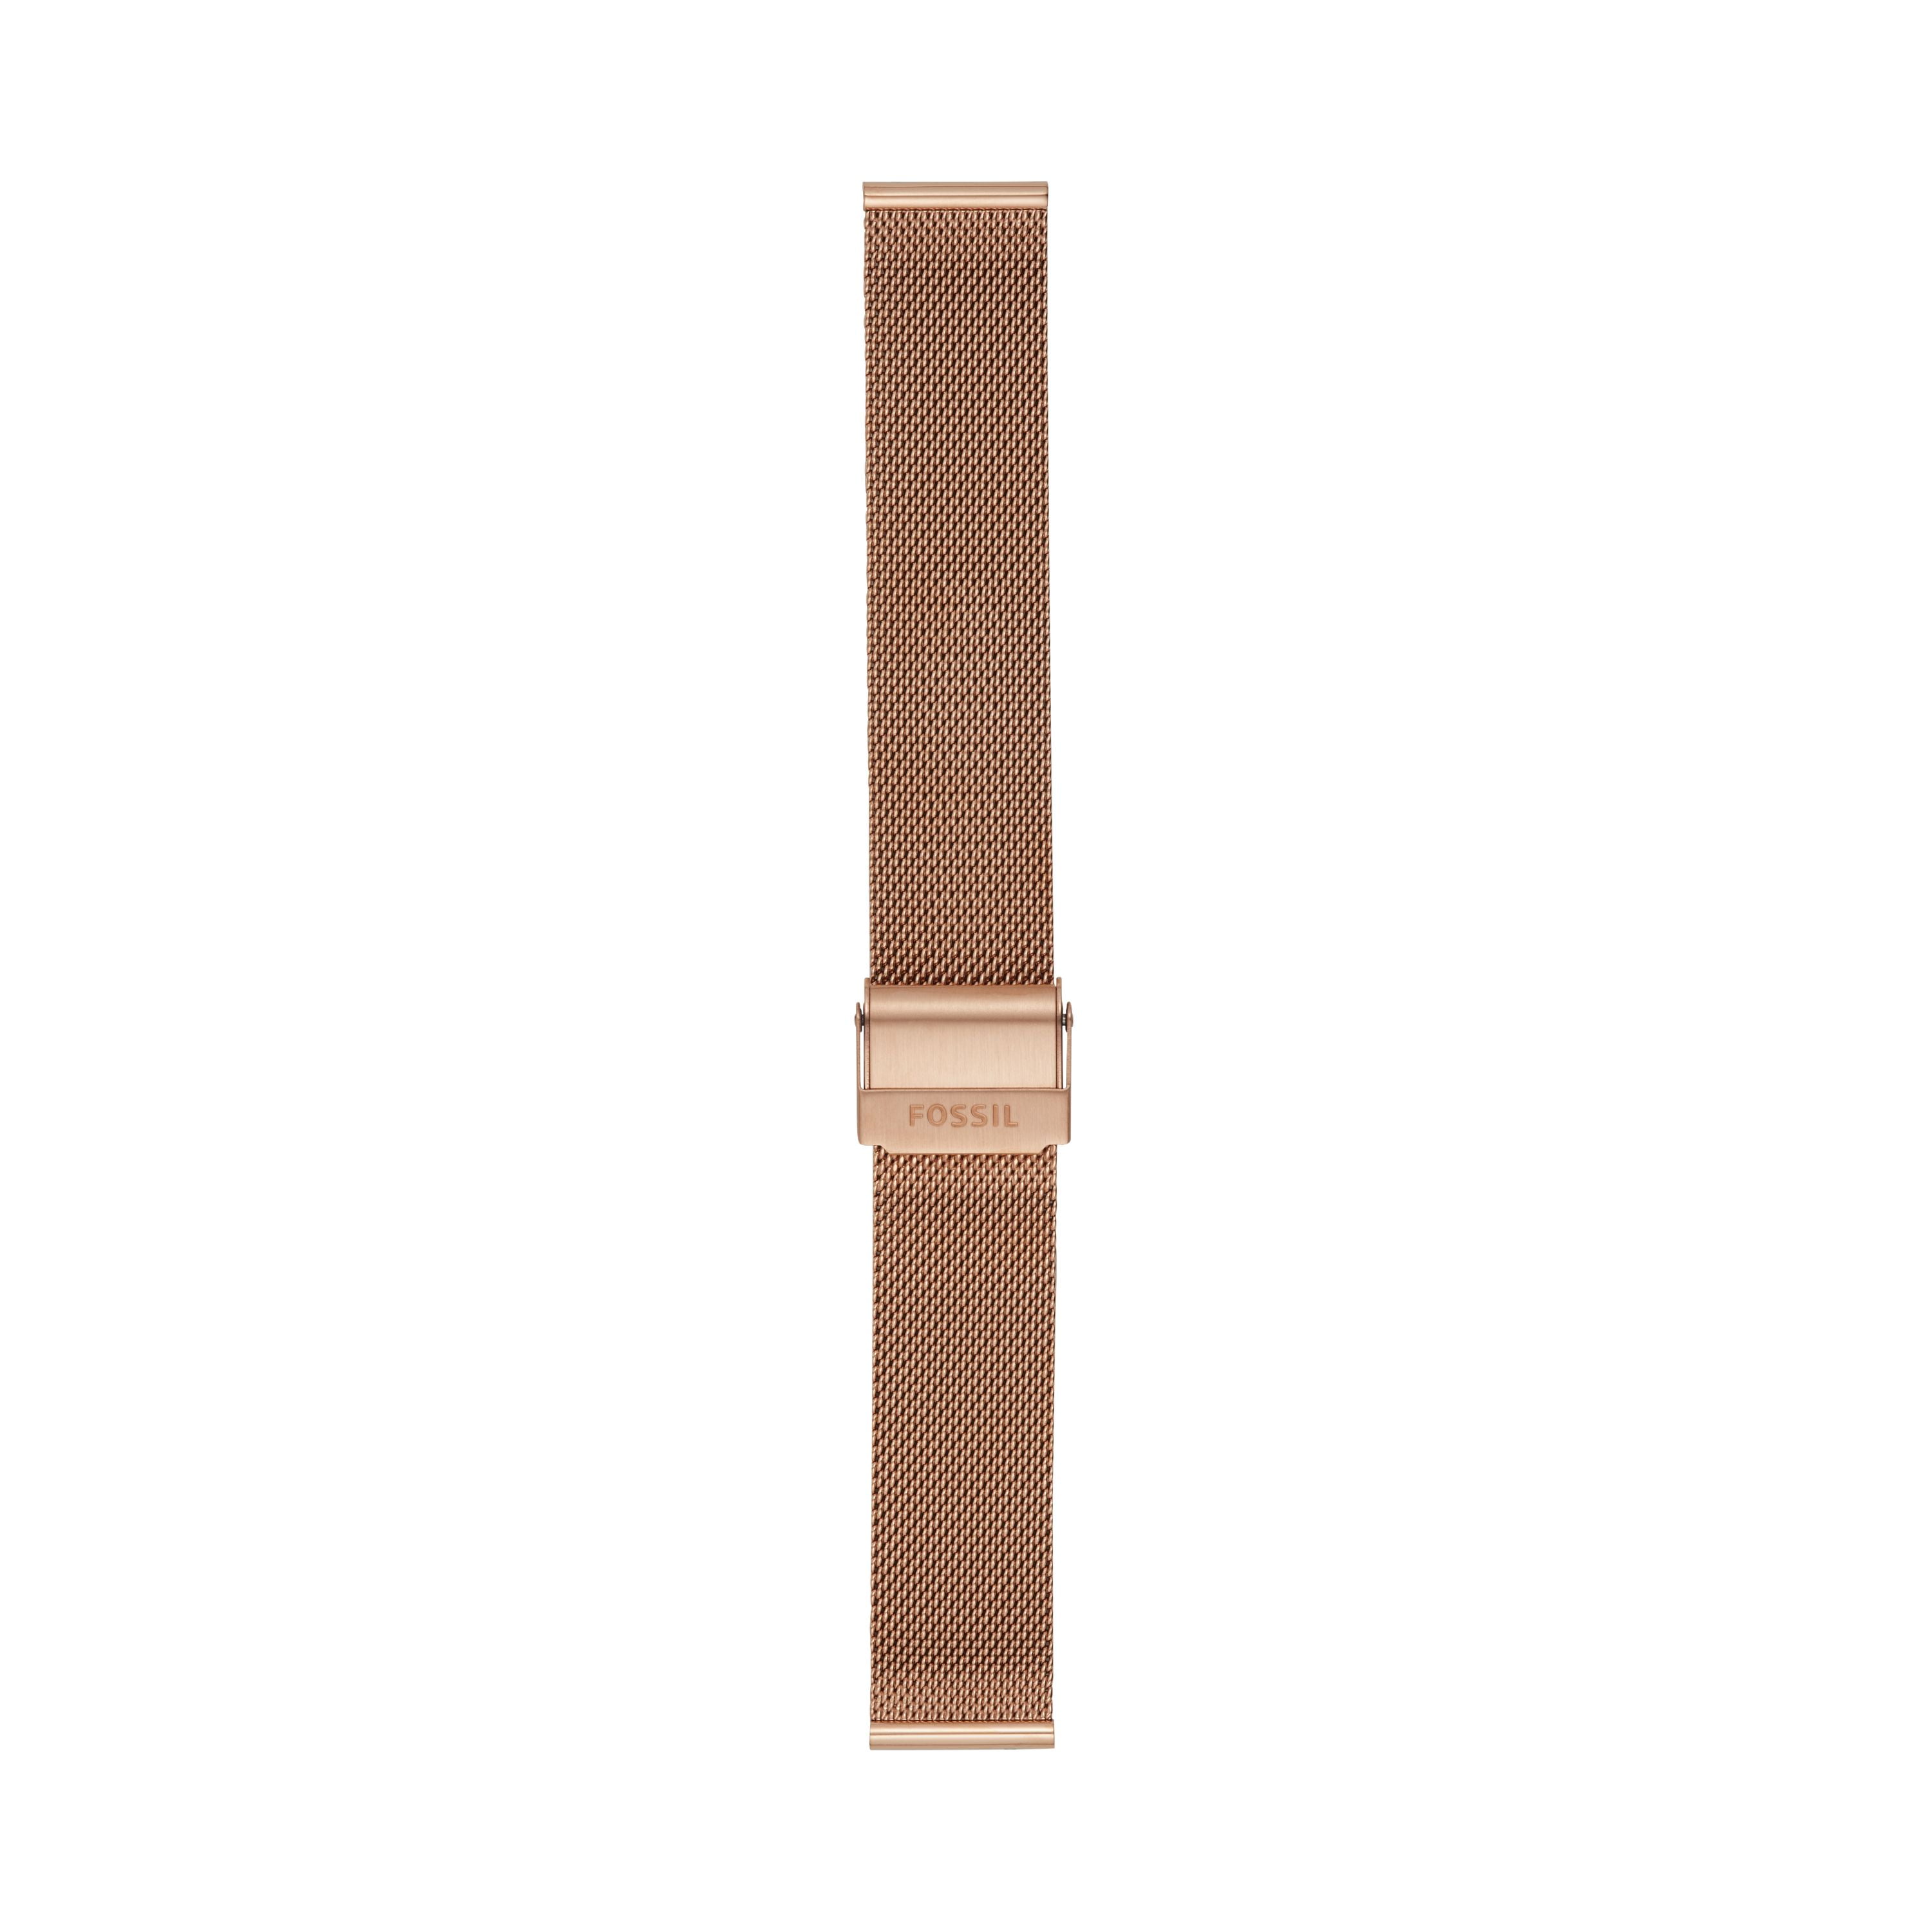 Fossil Leather 22mm Watch Strap Brown | Fossil Watch Brown Leather Band -  Watch - Aliexpress